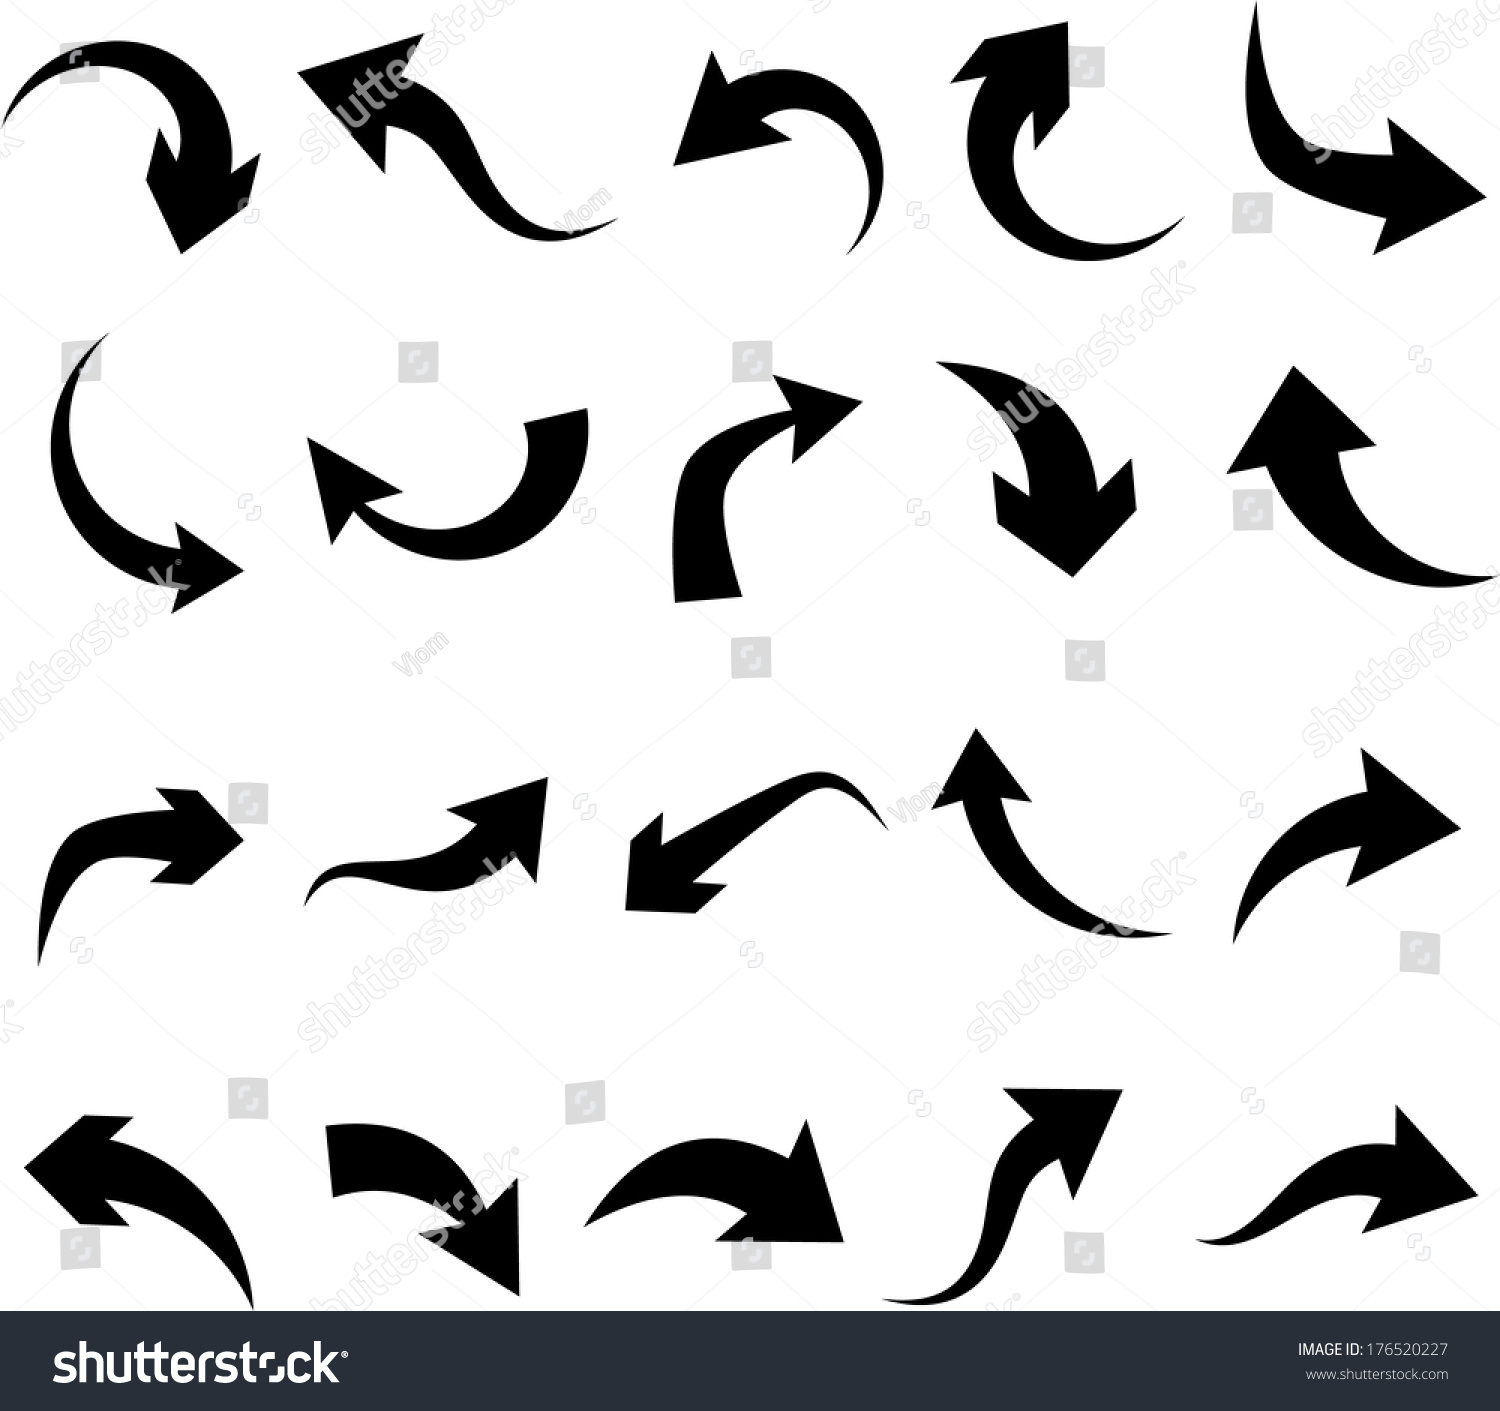 Vector Illustration Of Curved Arrow Icons 176520227 Shutterstock 9764